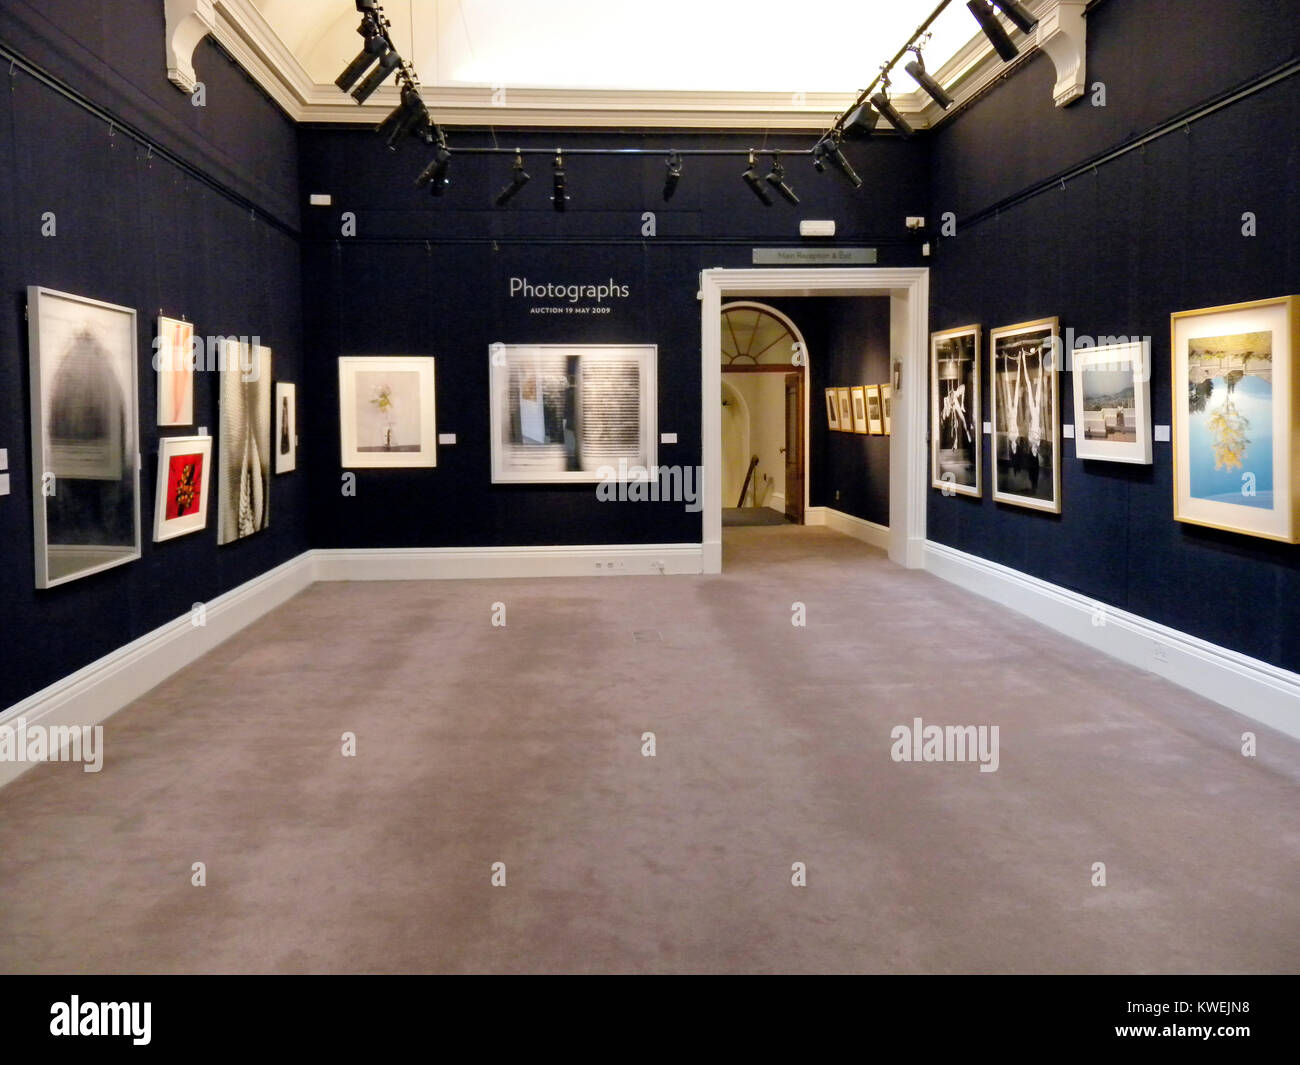 Art pieces displayed before auction at Sotheby's headquarters in London Mayfair area Stock Photo